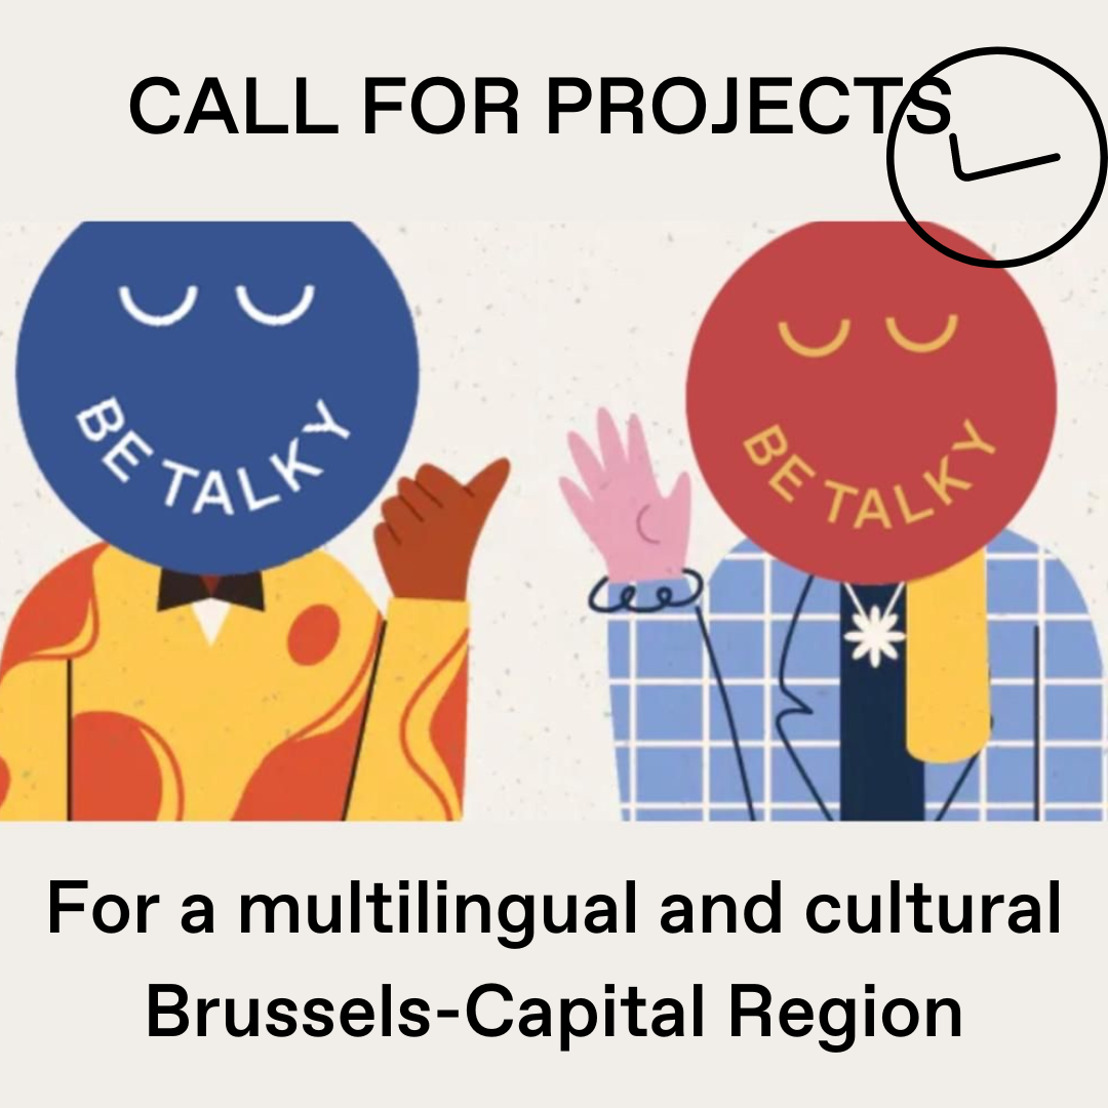 12 cultural projects receive support through BeTalky.brussels   